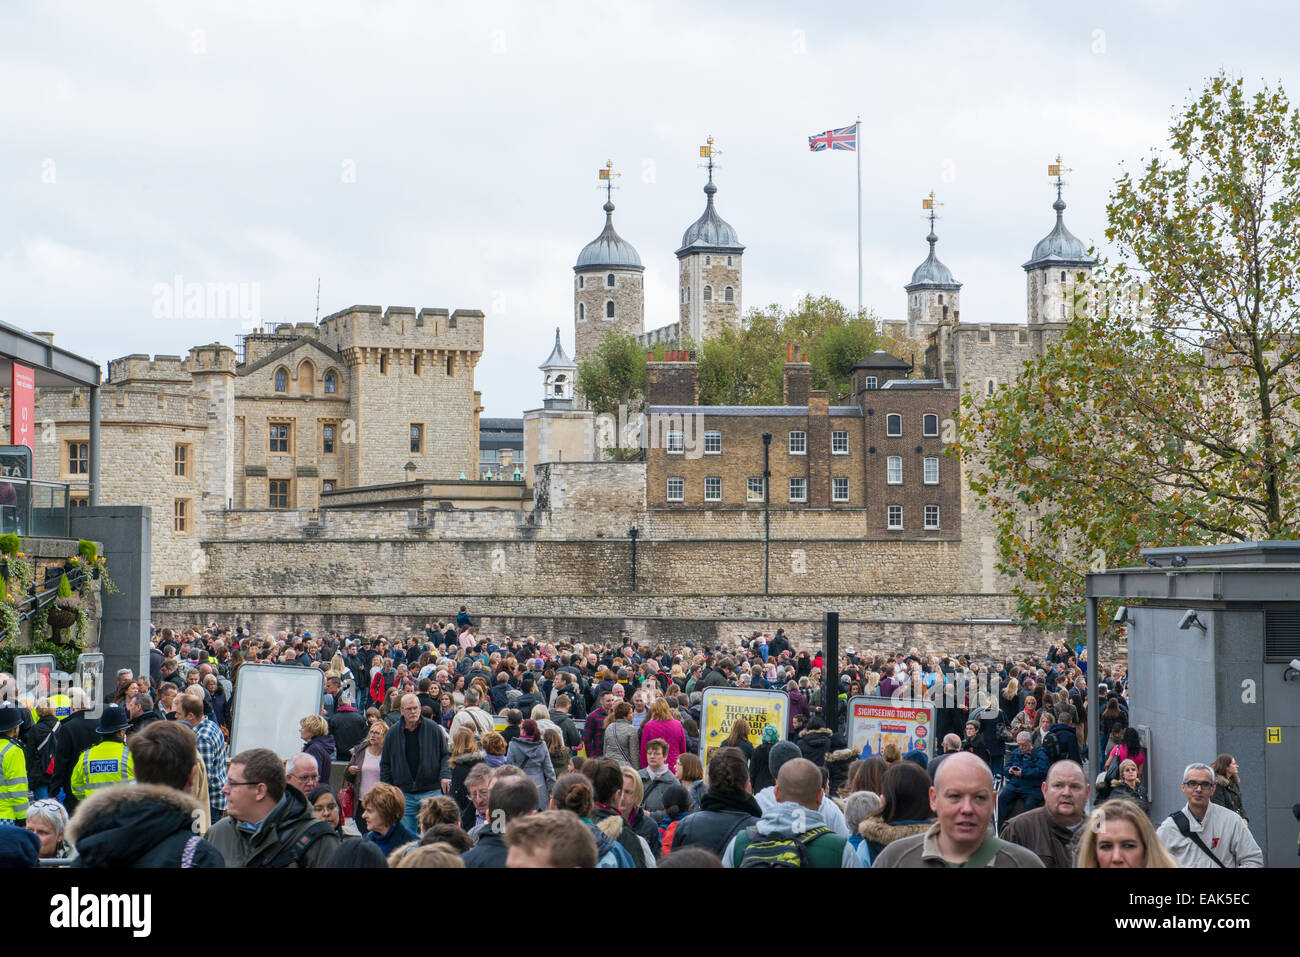 LONDON, UK - NOVEMBER 08: Crowd in front of Tower of London one day before remembrance day. November 08, 2014 in London. The pub Stock Photo